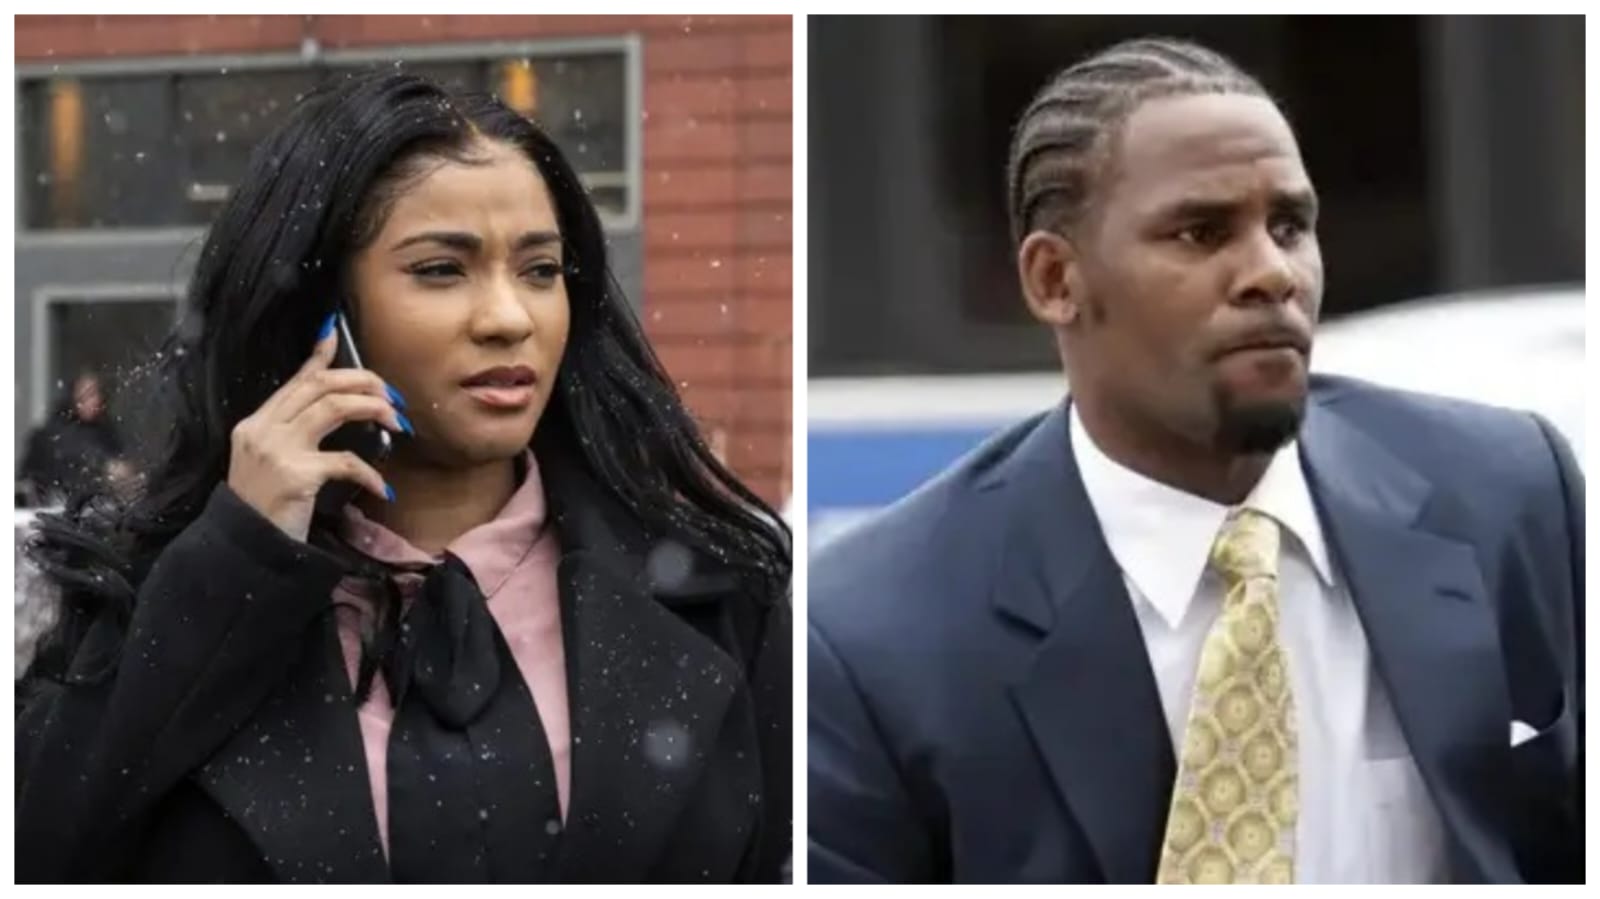 R Kelly-Joycelyn Savage engagement: What letter to judge says